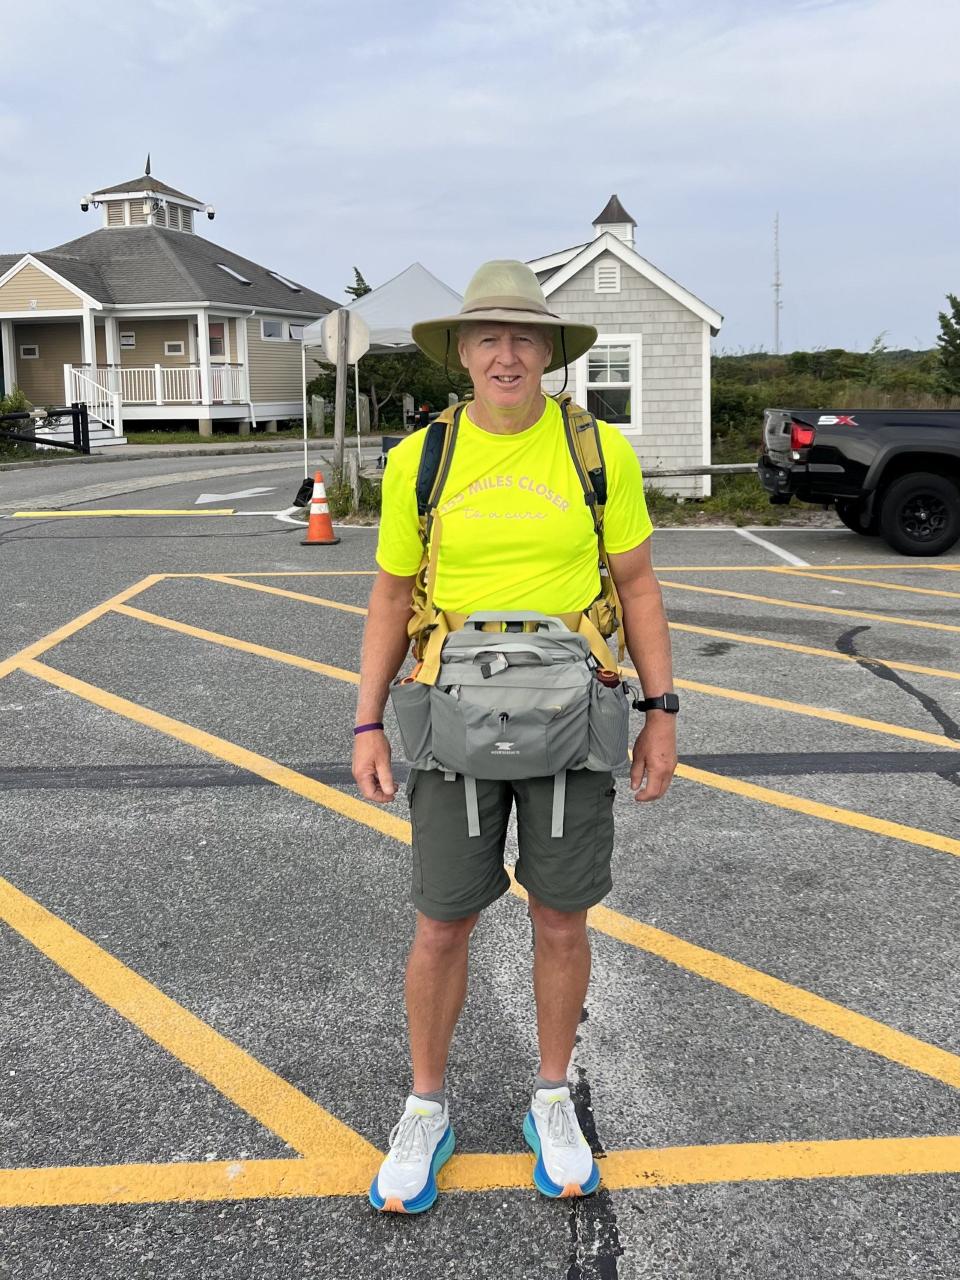 Tim Duffy, of Ogunquit, Maine, is seen Aug. 21, 2023, at Seagull Beach in Massachusetts, ready to go on the first day of his walk to raise funds and awareness for the fight against pancreatic cancer. His wife, Kate, who battled the disease, died in 2022.